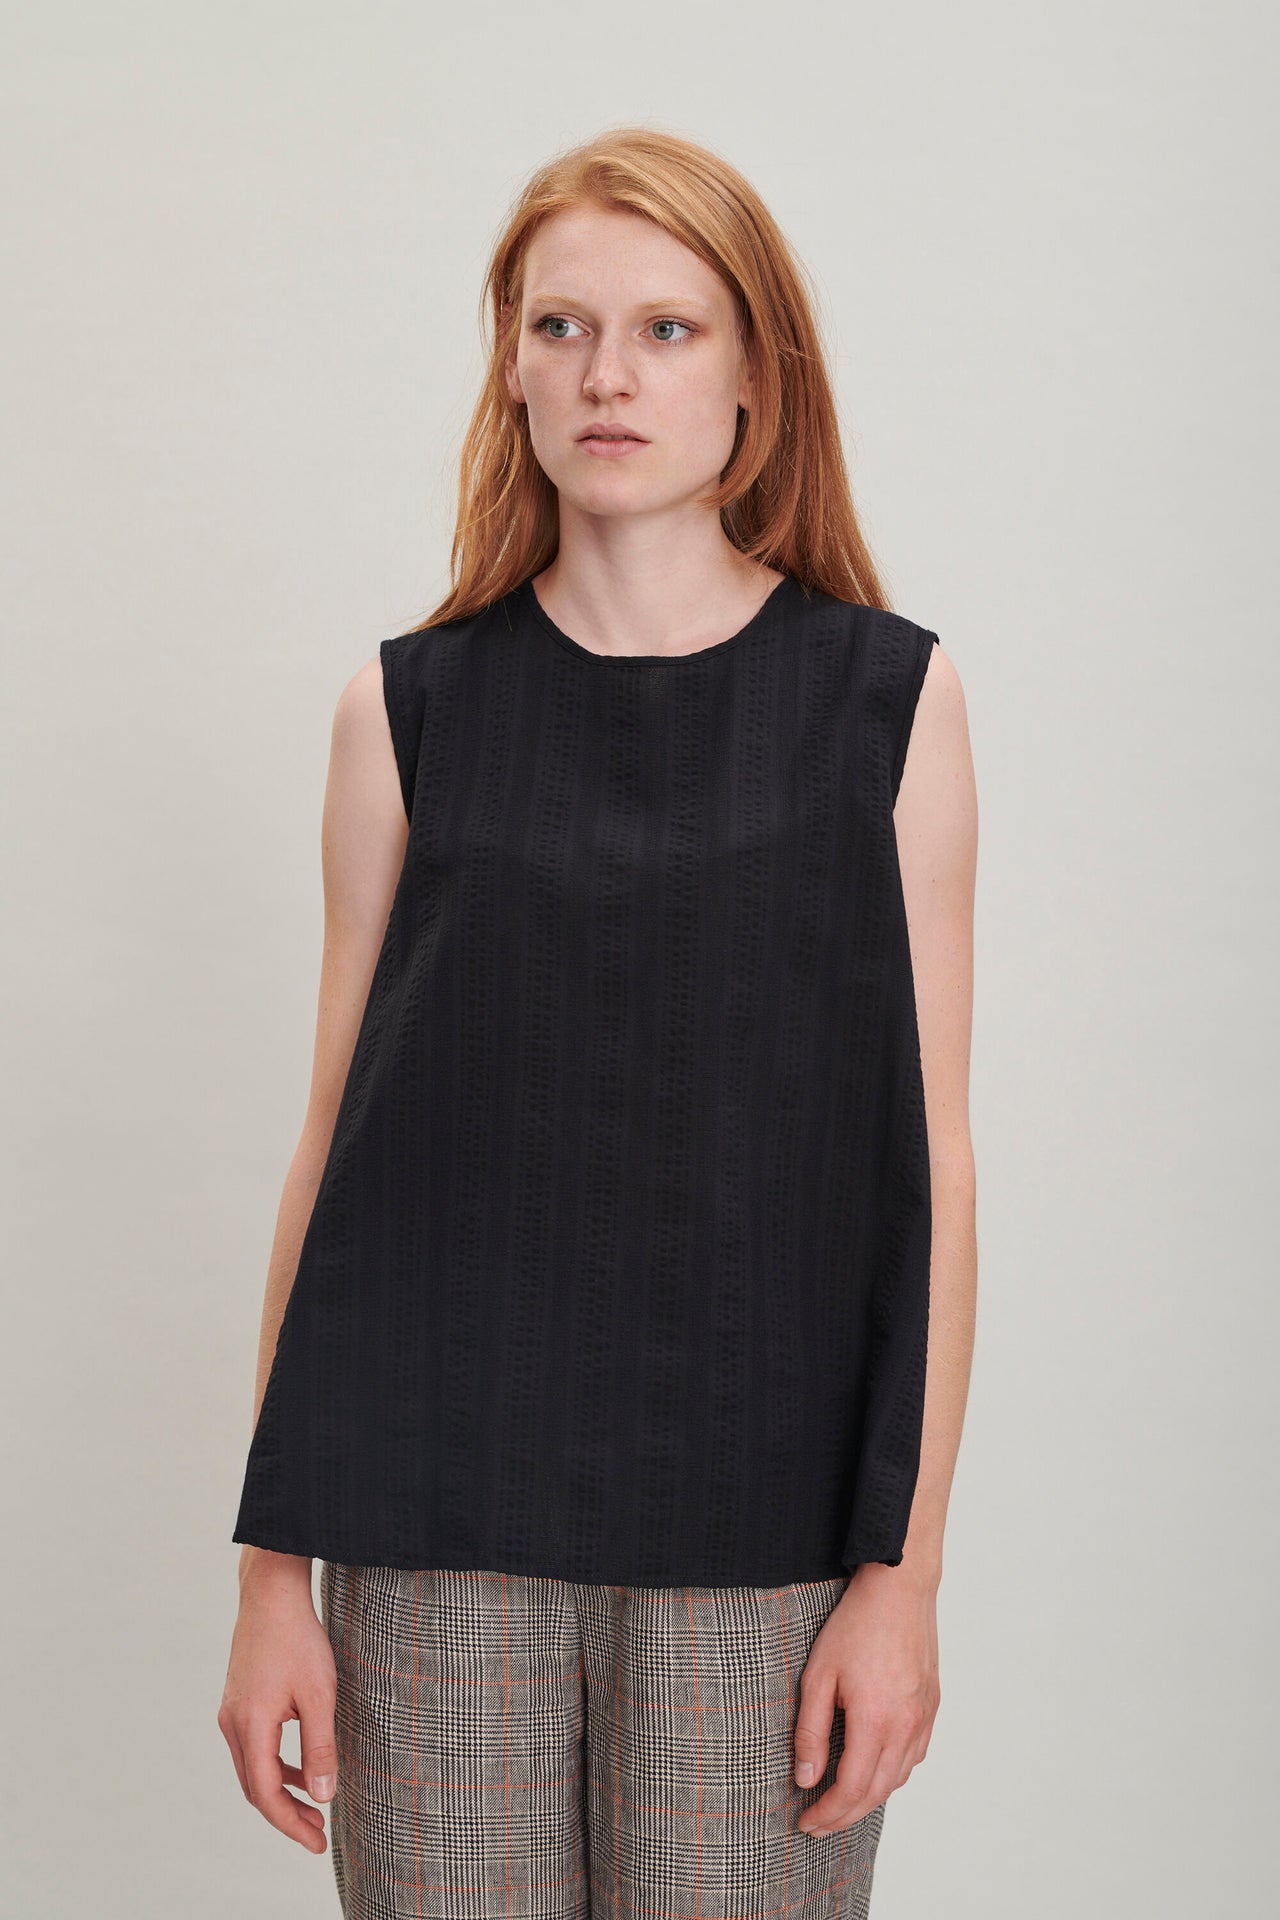 A-Shape Sleeveless Top in a Black Structural Fine Portuguese Cotton